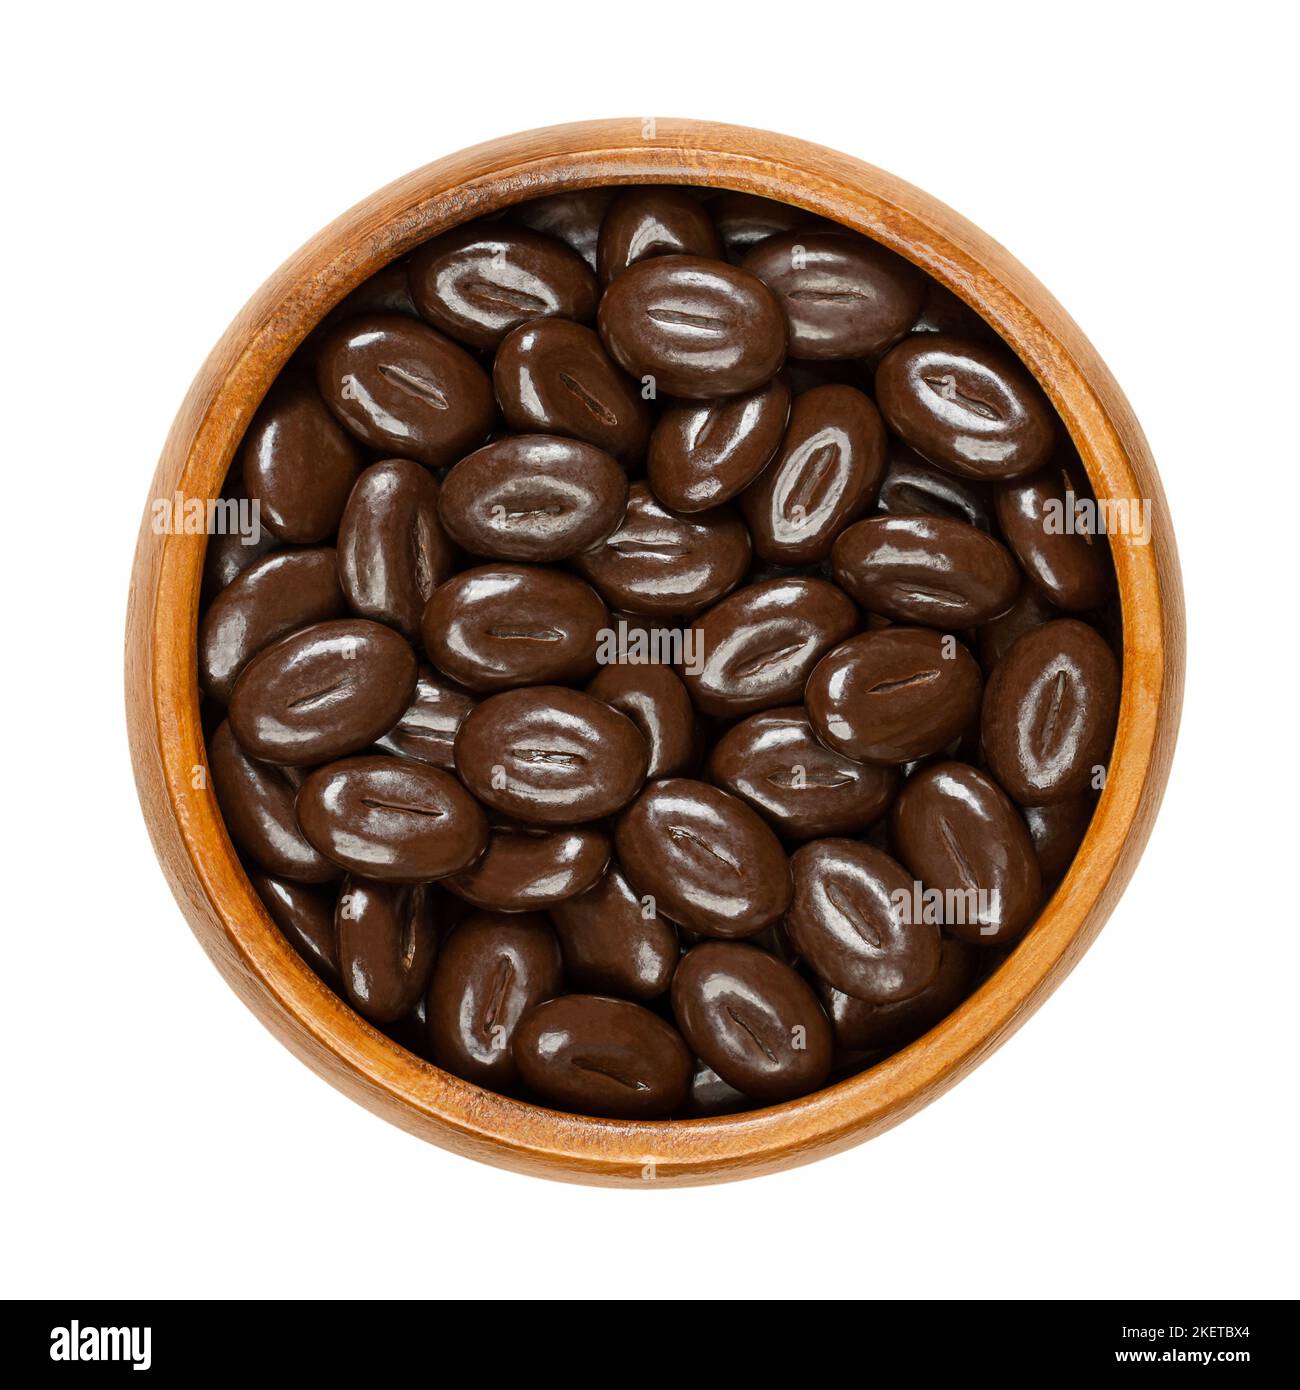 Dark chocolate mocha beans, in a wooden bowl. Candies made of a mixture of coffee bean flavor with dark chocolate, in the shape of coffee beans. Stock Photo